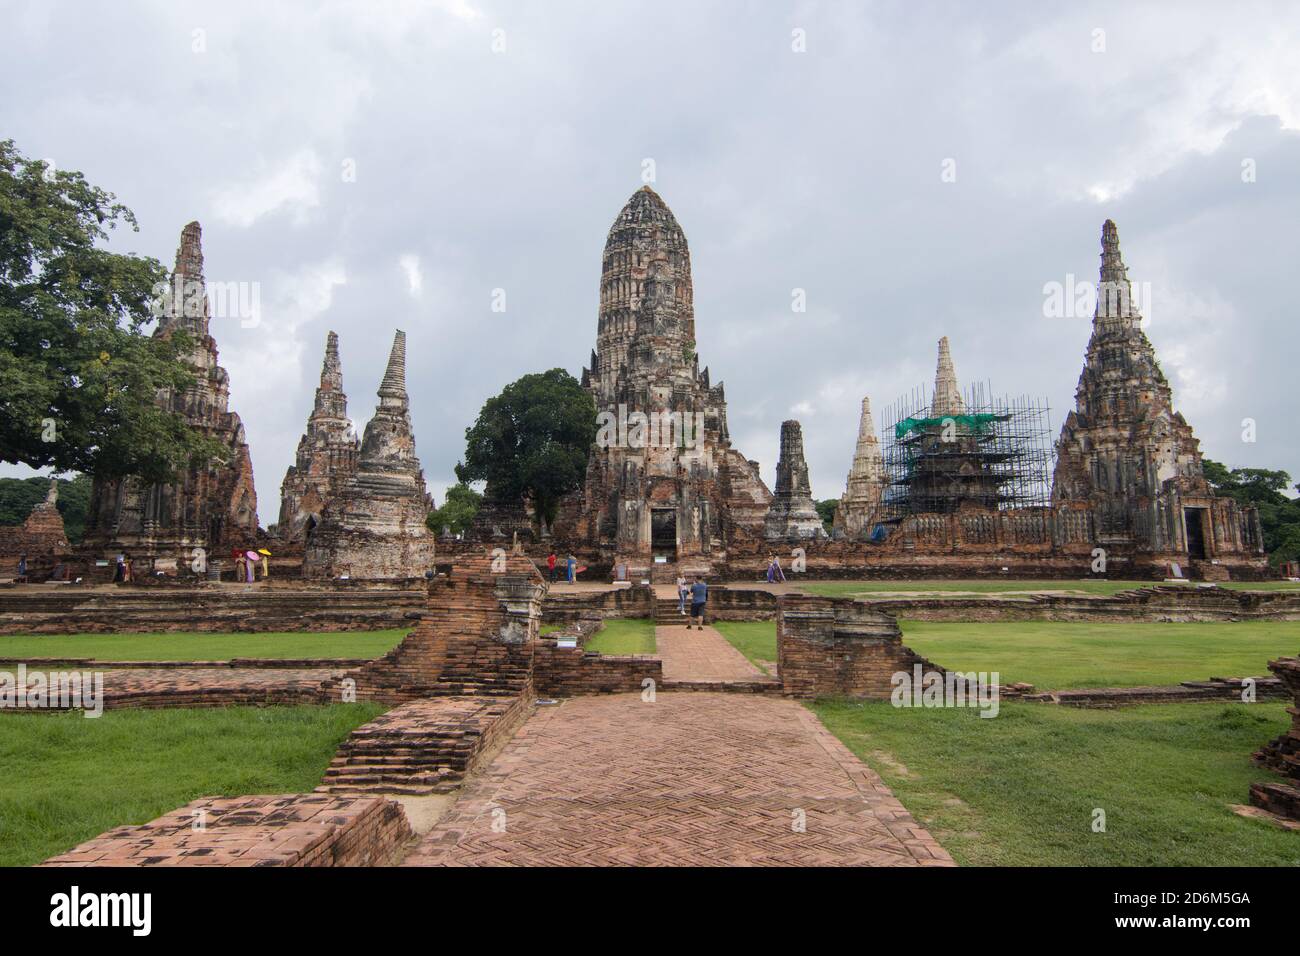 Wat Chaiwatthanaram is a Buddhist temple in the city of Ayutthaya Historical Park, is a landmark of Thailand History and is a tourist attraction Stock Photo